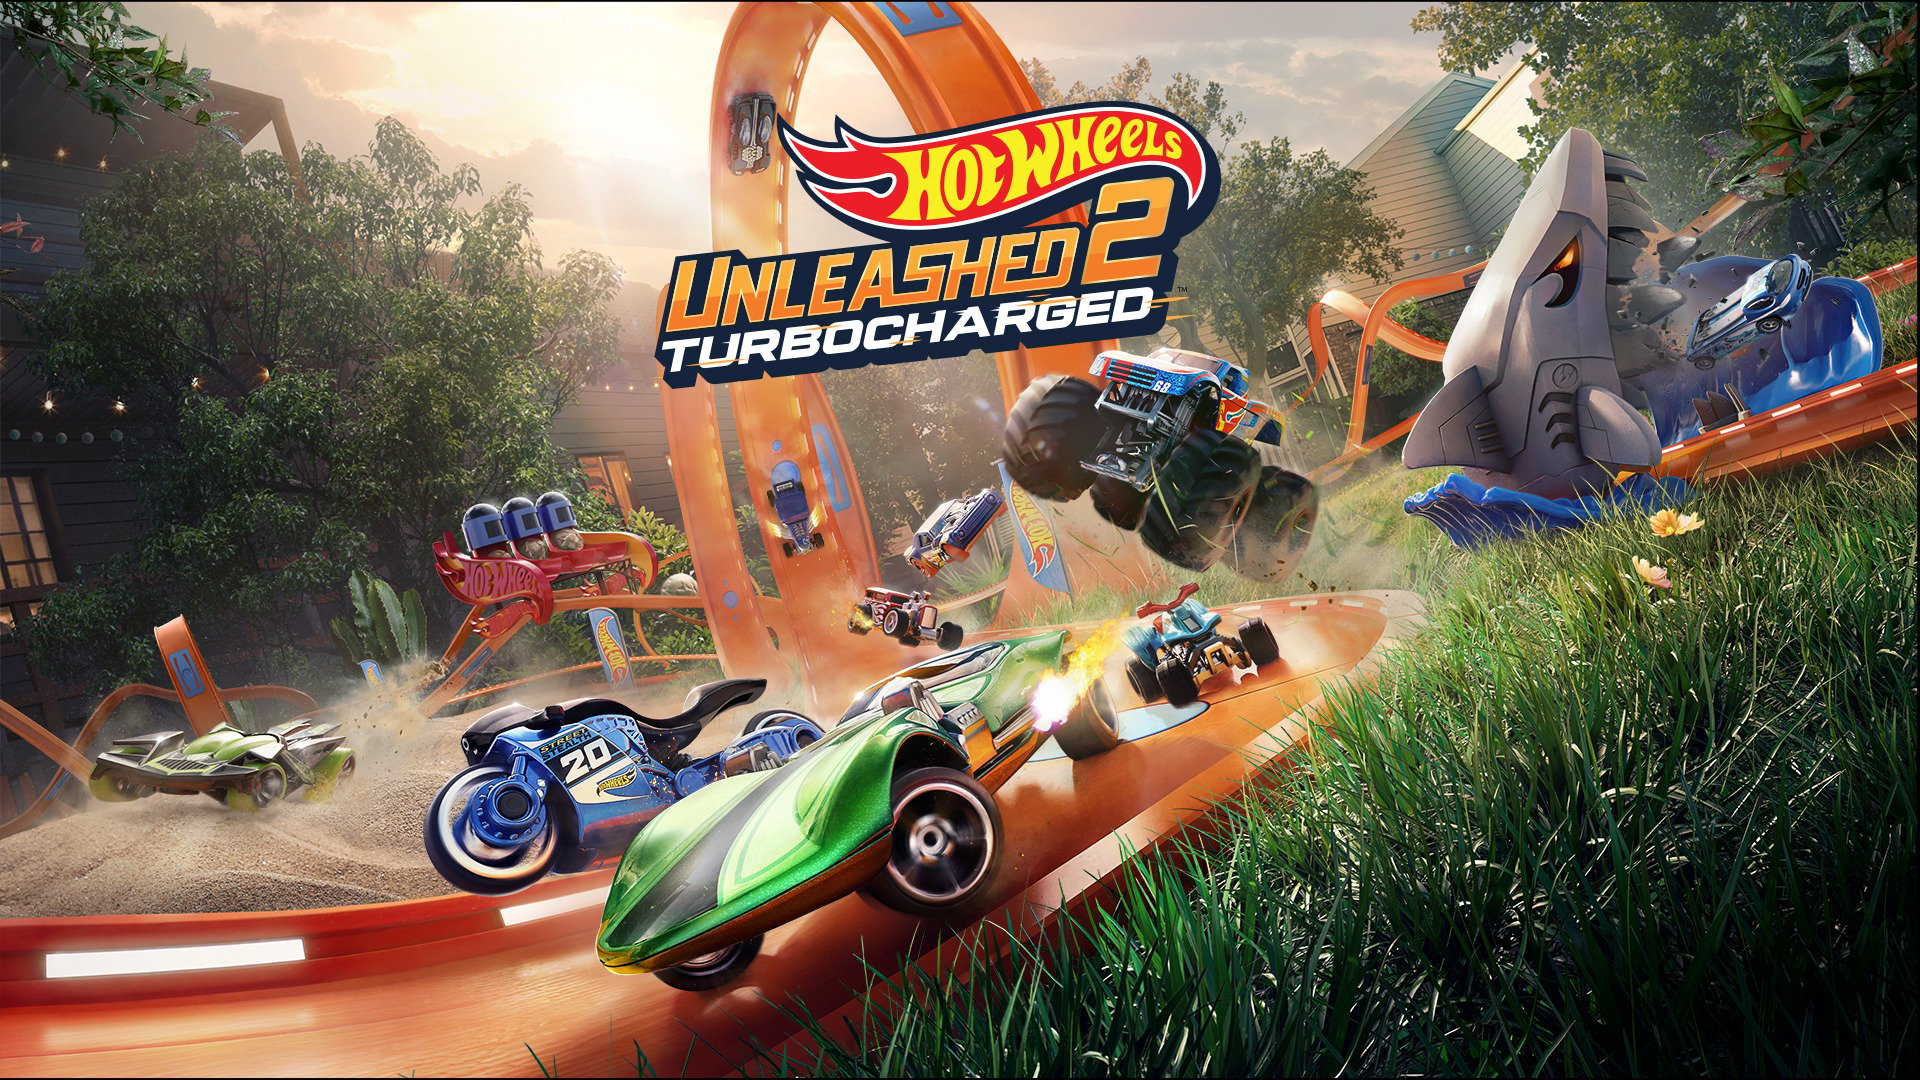 Hot Wheels Unleashed 2 Turbocharged Review: Small Scale, Big Fun – GTPlanet